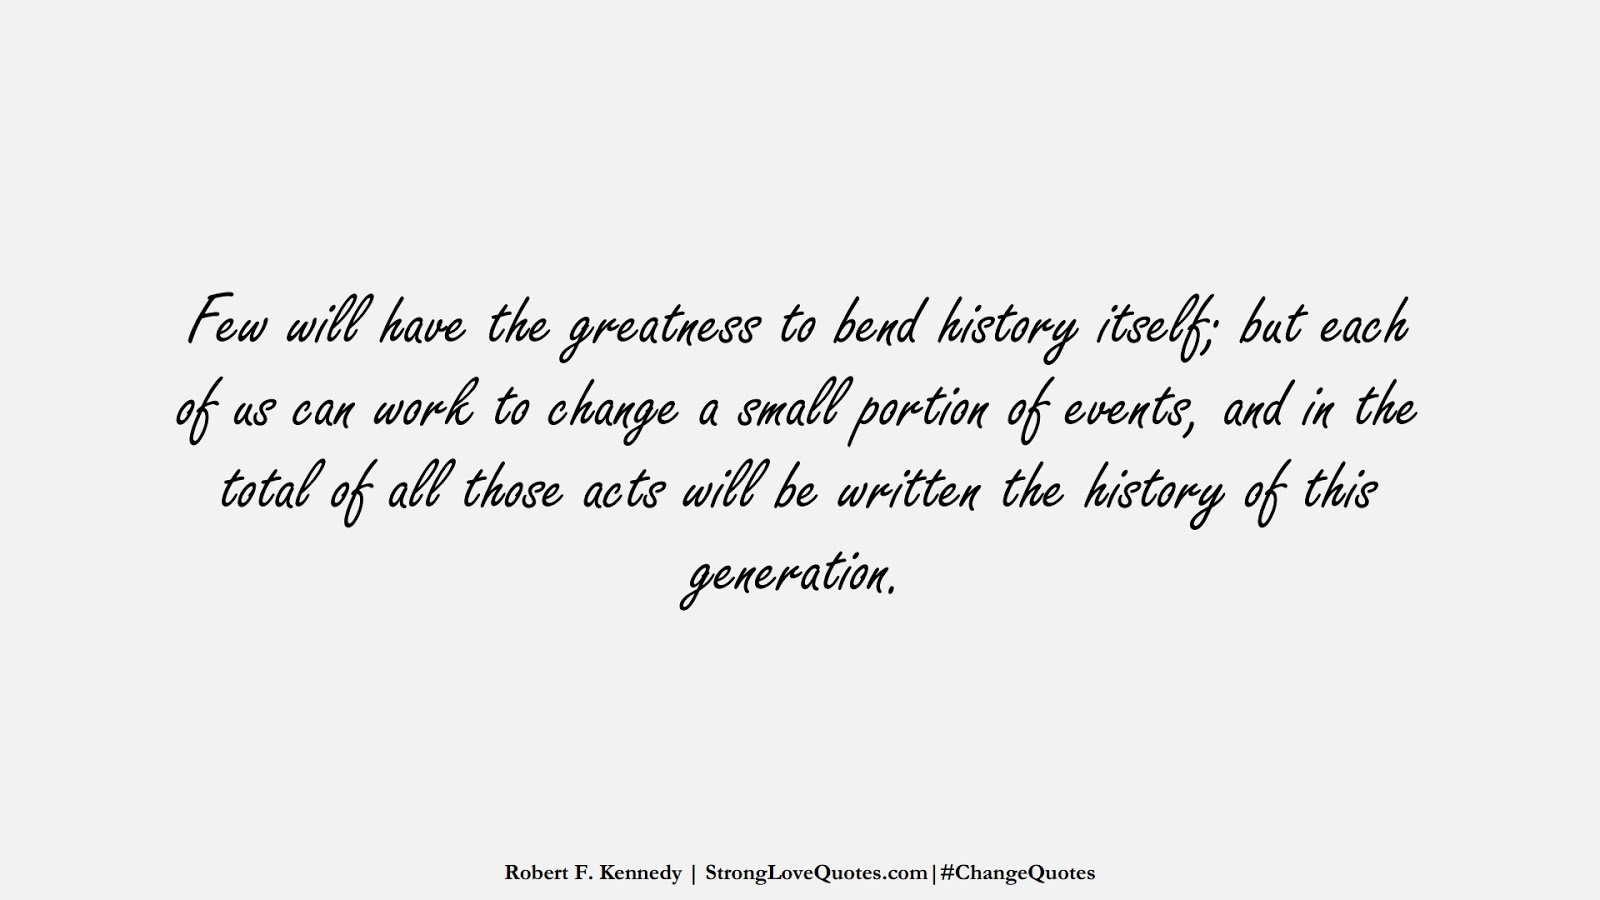 Few will have the greatness to bend history itself; but each of us can work to change a small portion of events, and in the total of all those acts will be written the history of this generation. (Robert F. Kennedy);  #ChangeQuotes